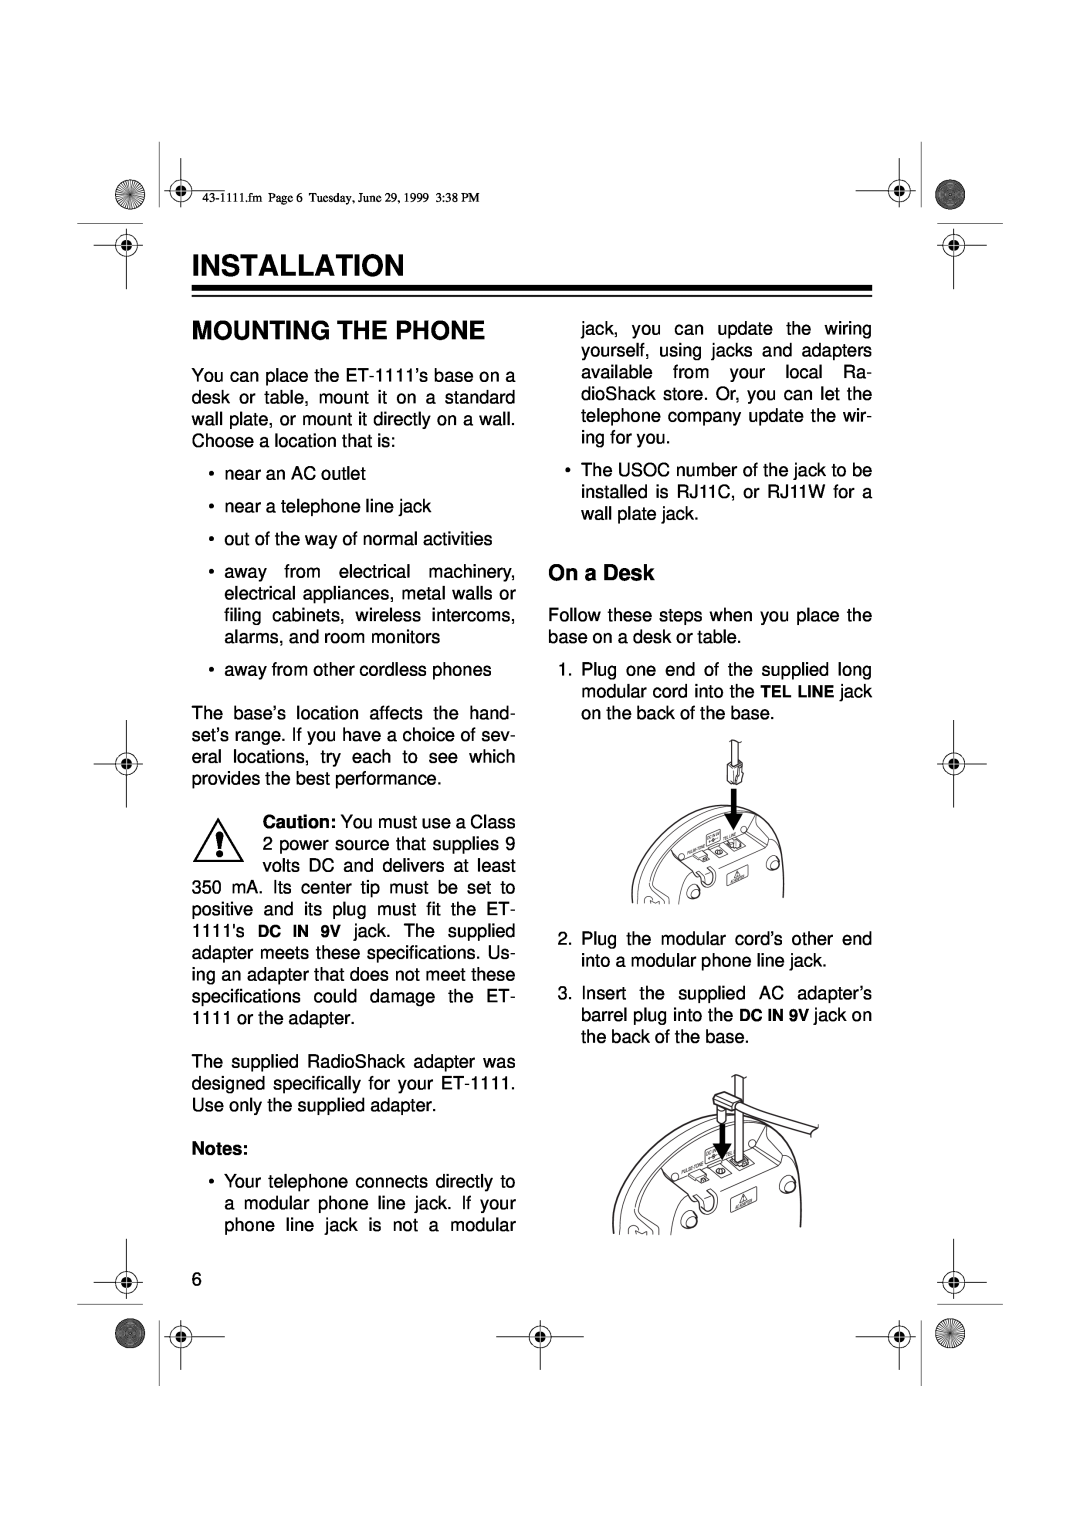 Radio Shack ET-1111 owner manual Installation, Mounting The Phone, On a Desk 